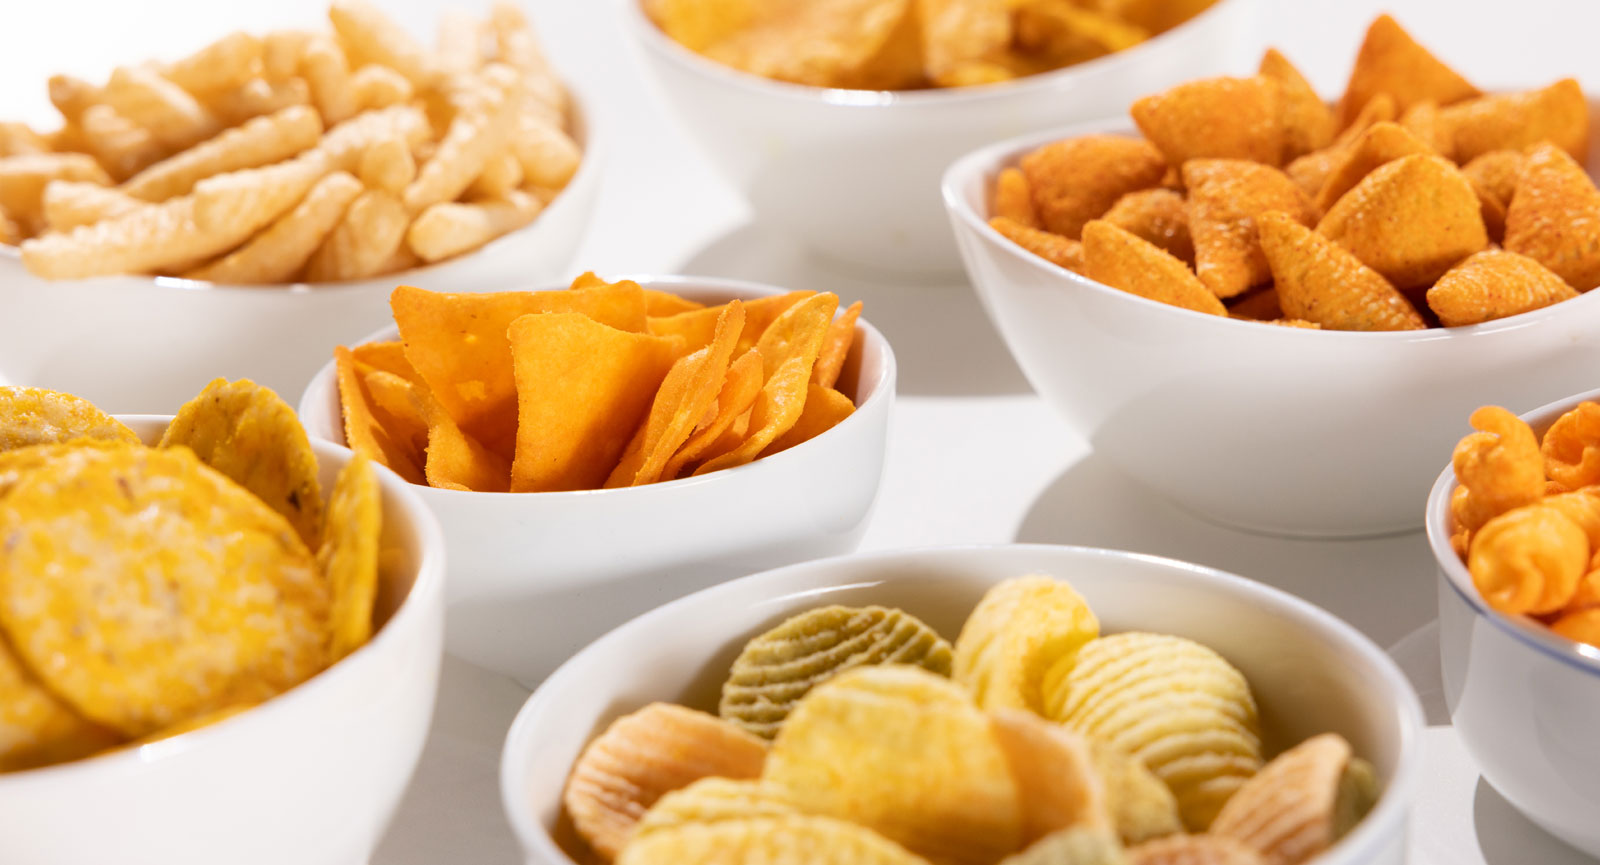 Various delectable snacks that use natural preservatives in white bowls